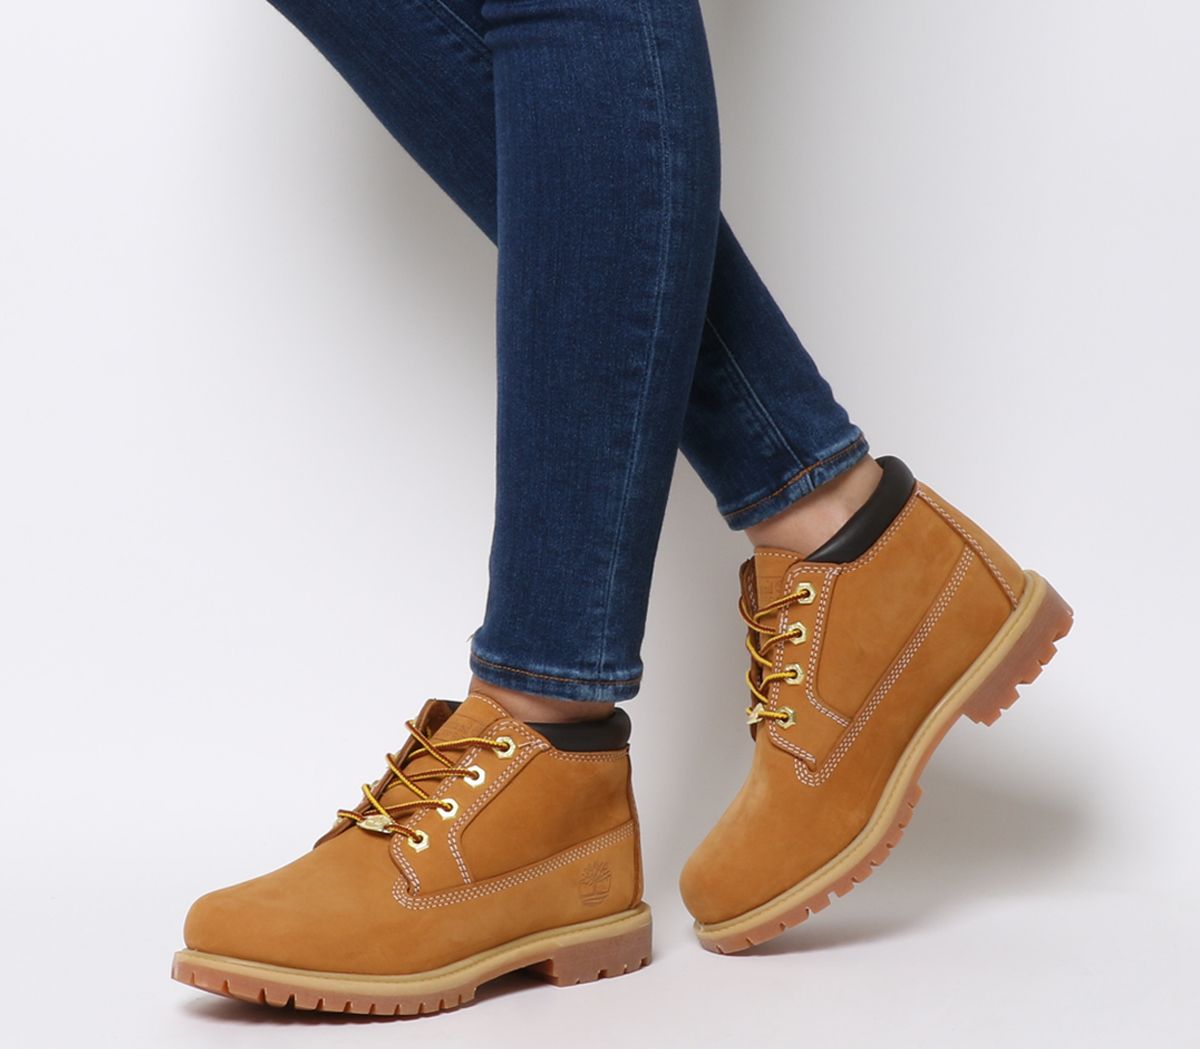 Timberland Nellie Chukka Double Waterproof Boots Wheat Nubuck - OFFCUTS SHOES by OFFICE